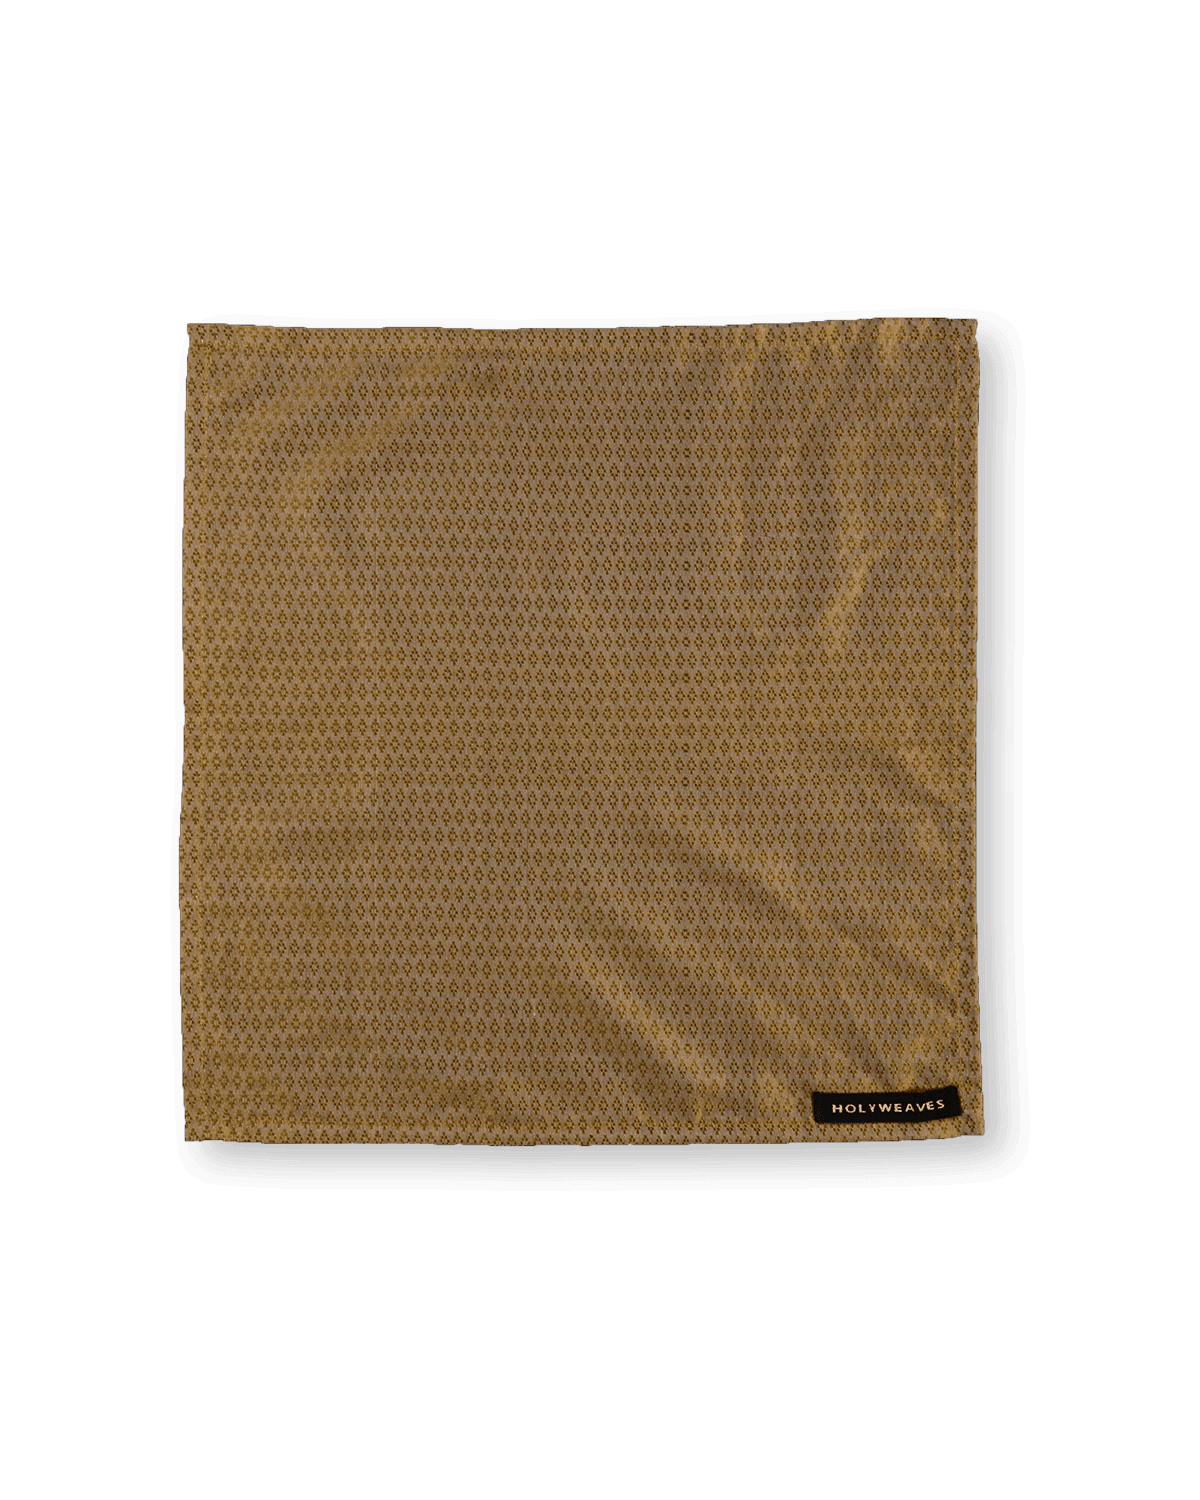 Green Beige Tanchoi Handwoven Pure Silk Pocket Square For Men - By HolyWeaves, Benares